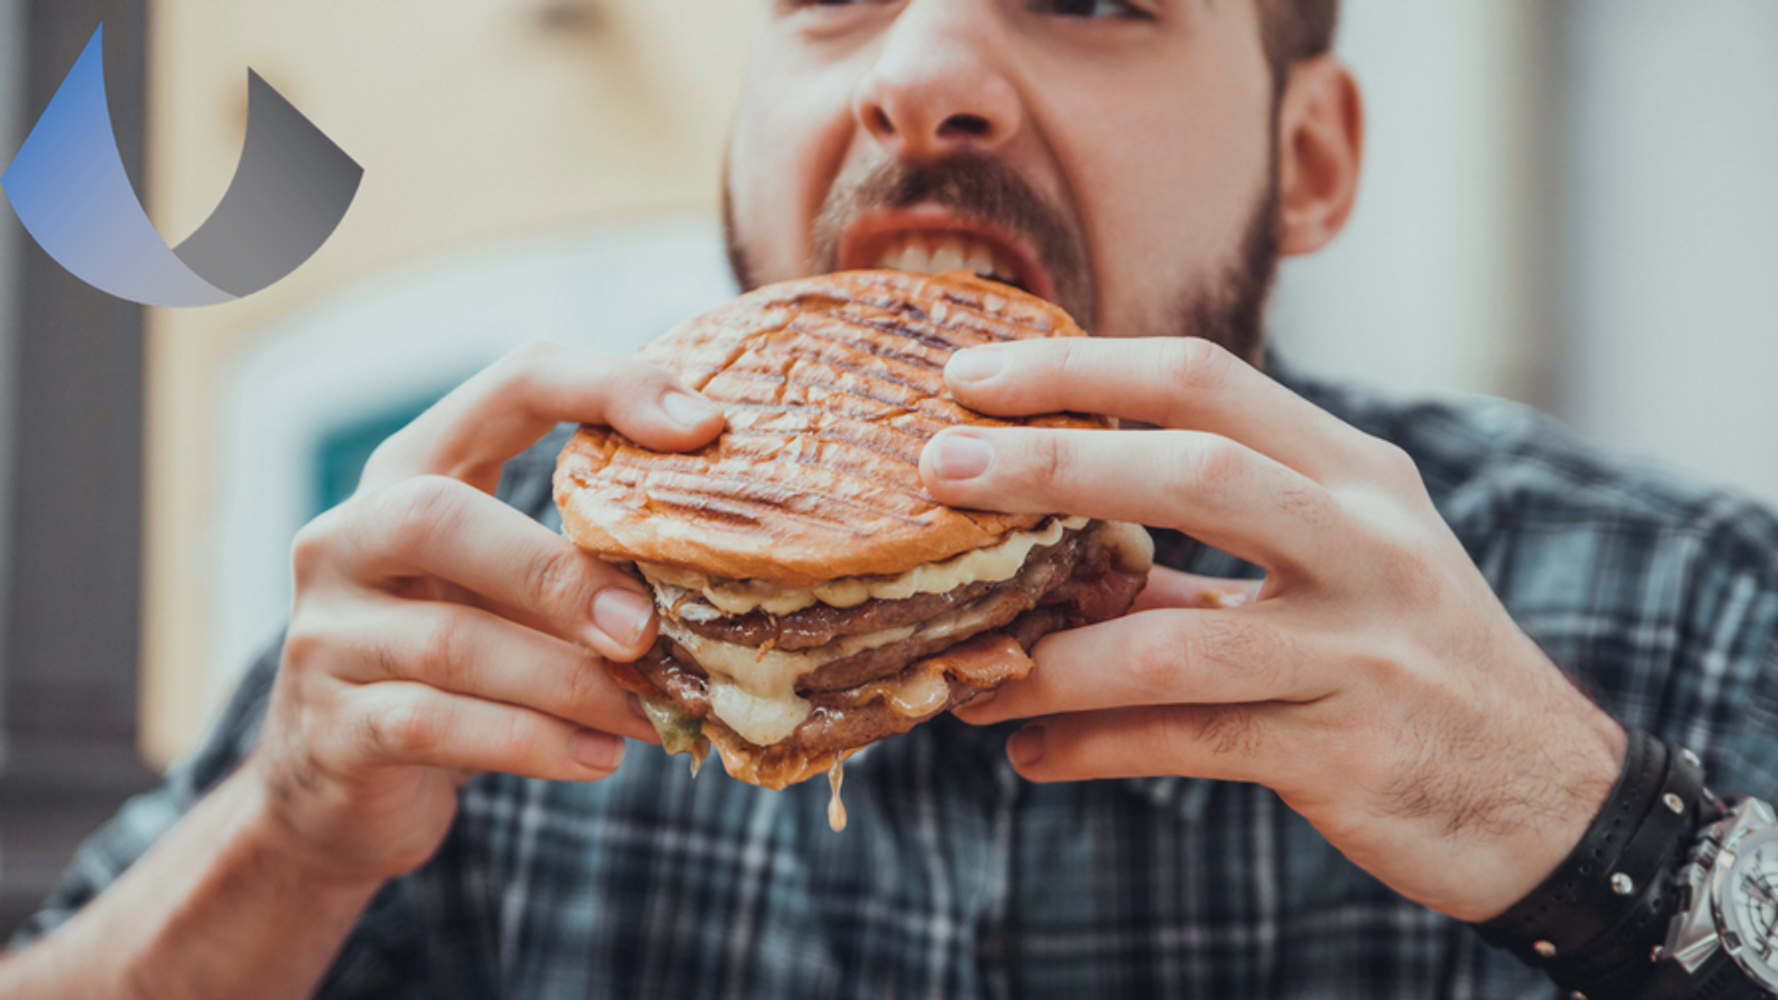 How To Deal With Binge Eating